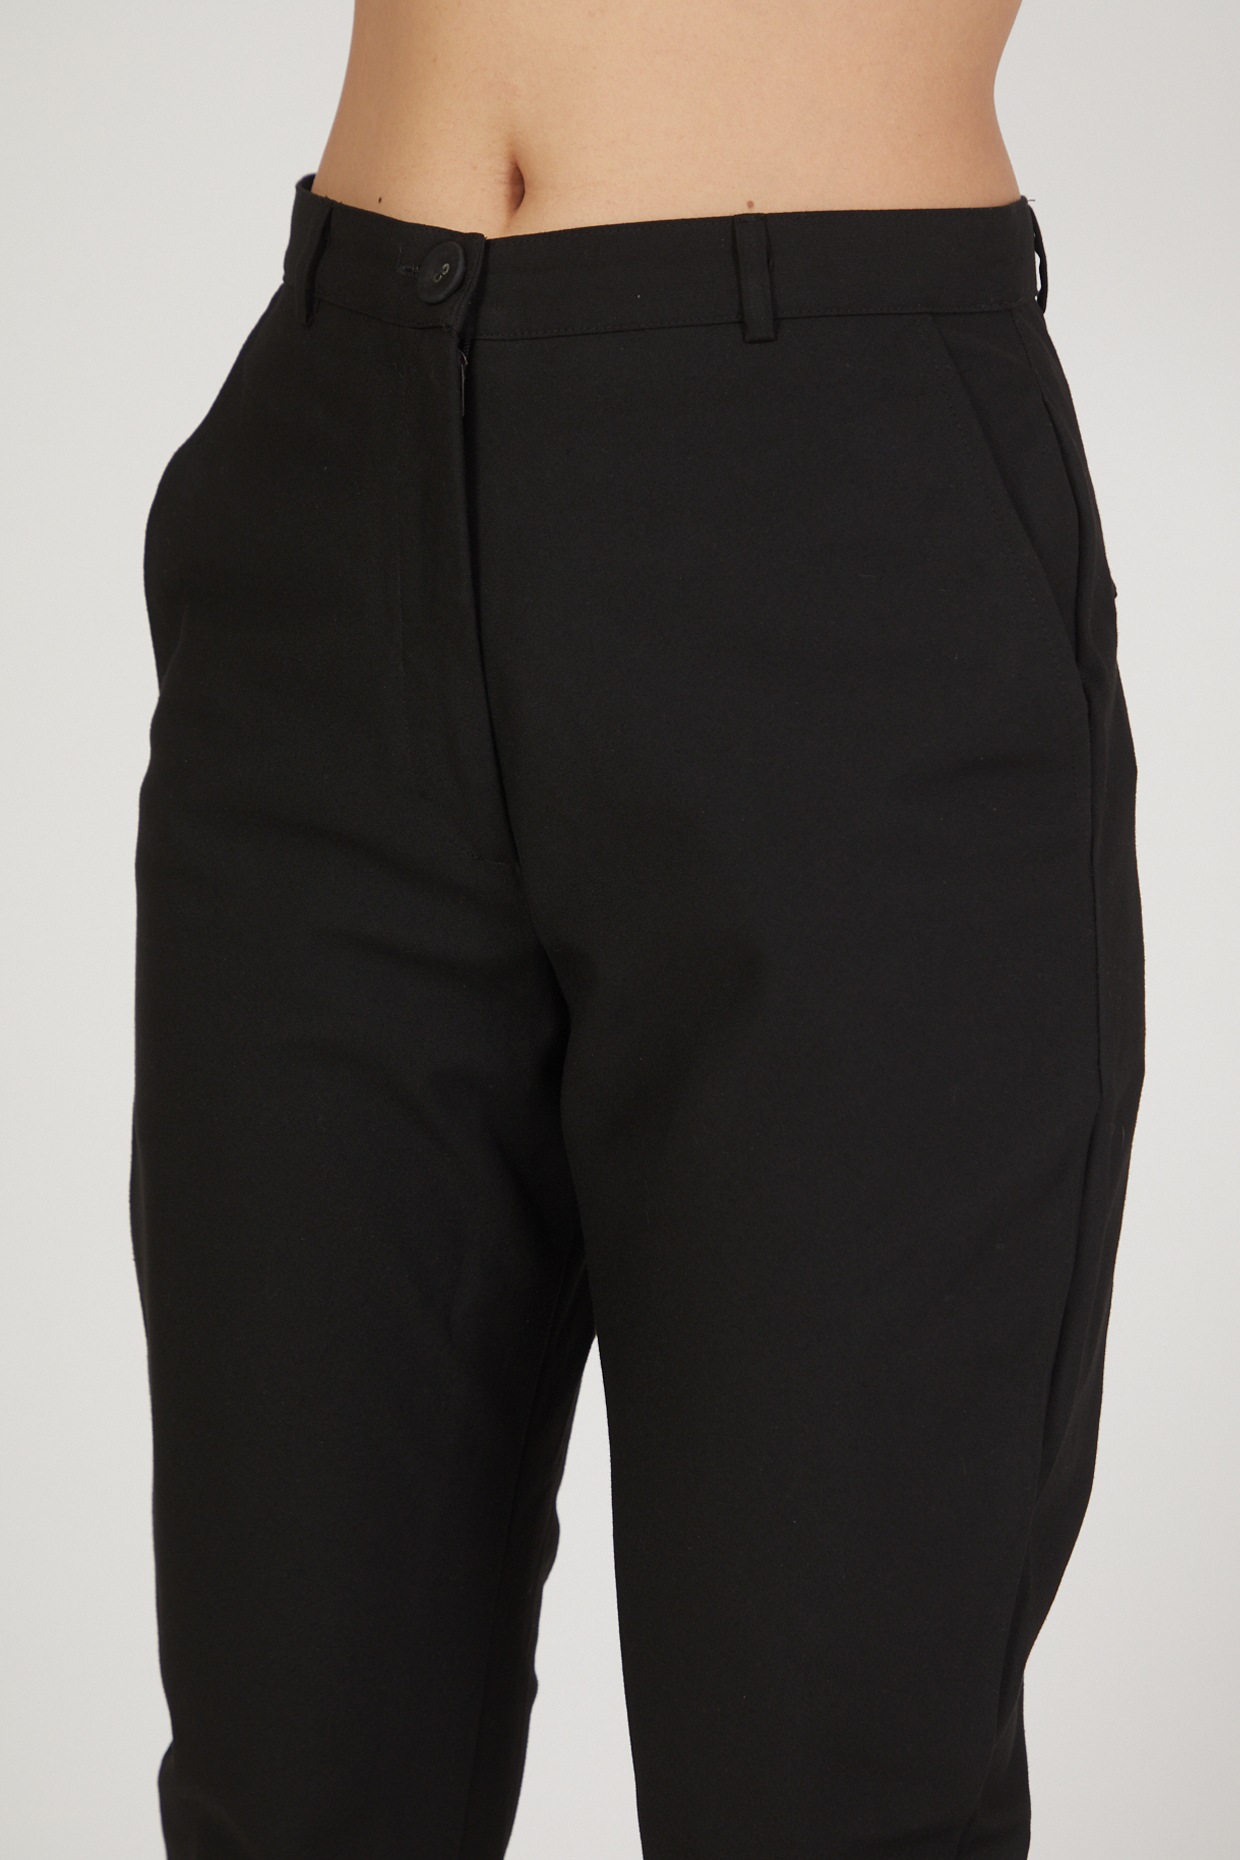 Skinny trousers with chain details black ladies' | Morgan